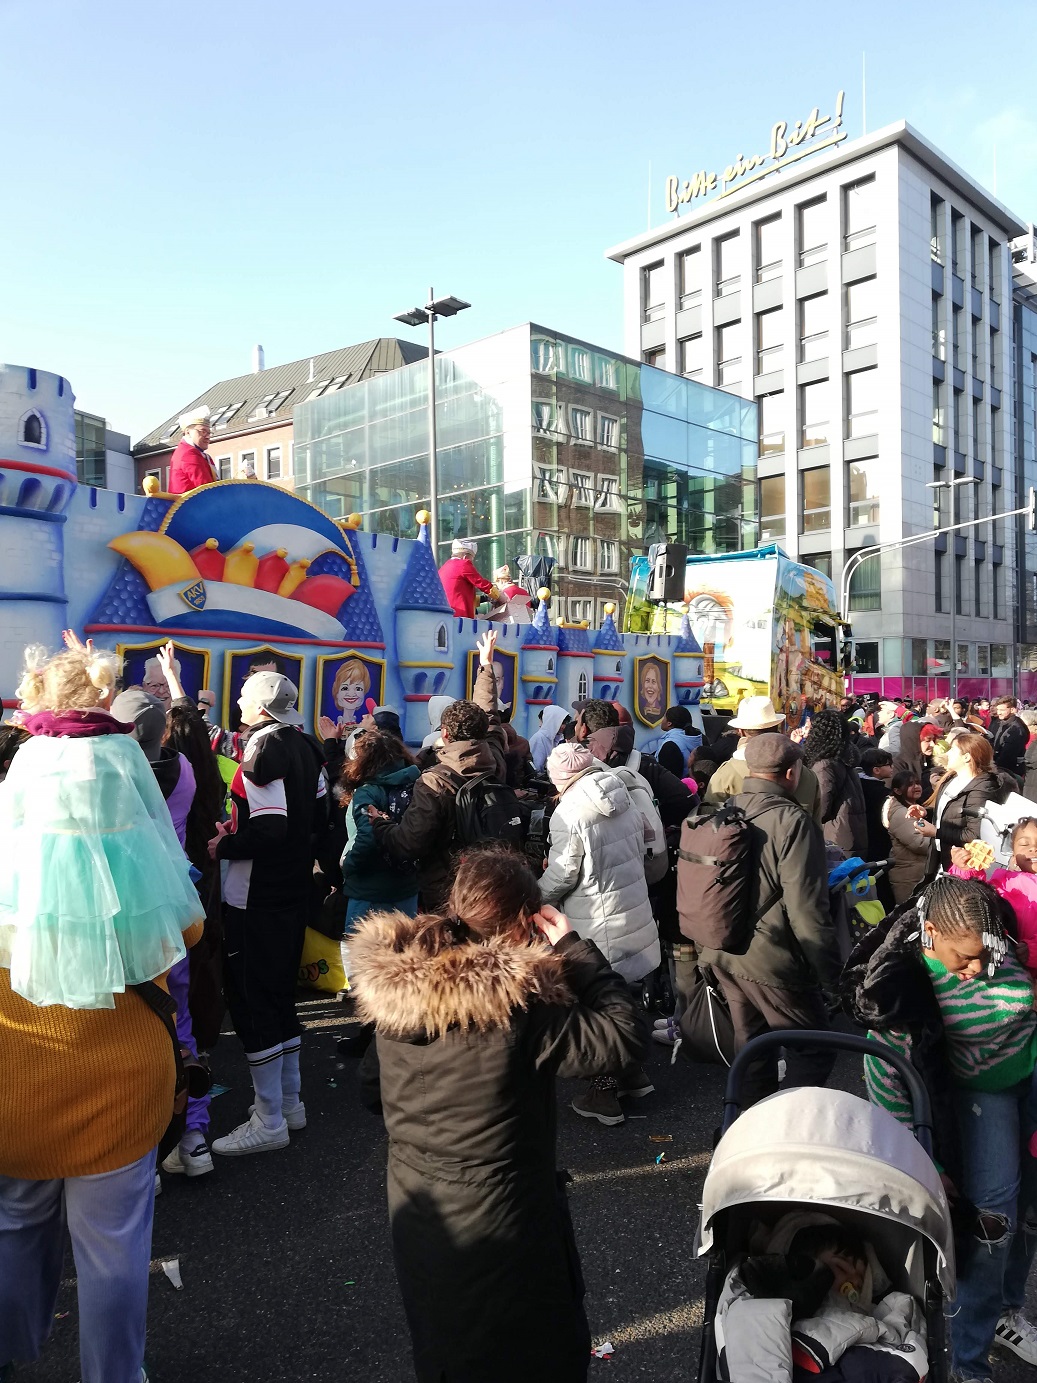 Celebrating Spring in Aachen: The Colorful Carnival Extravaganza